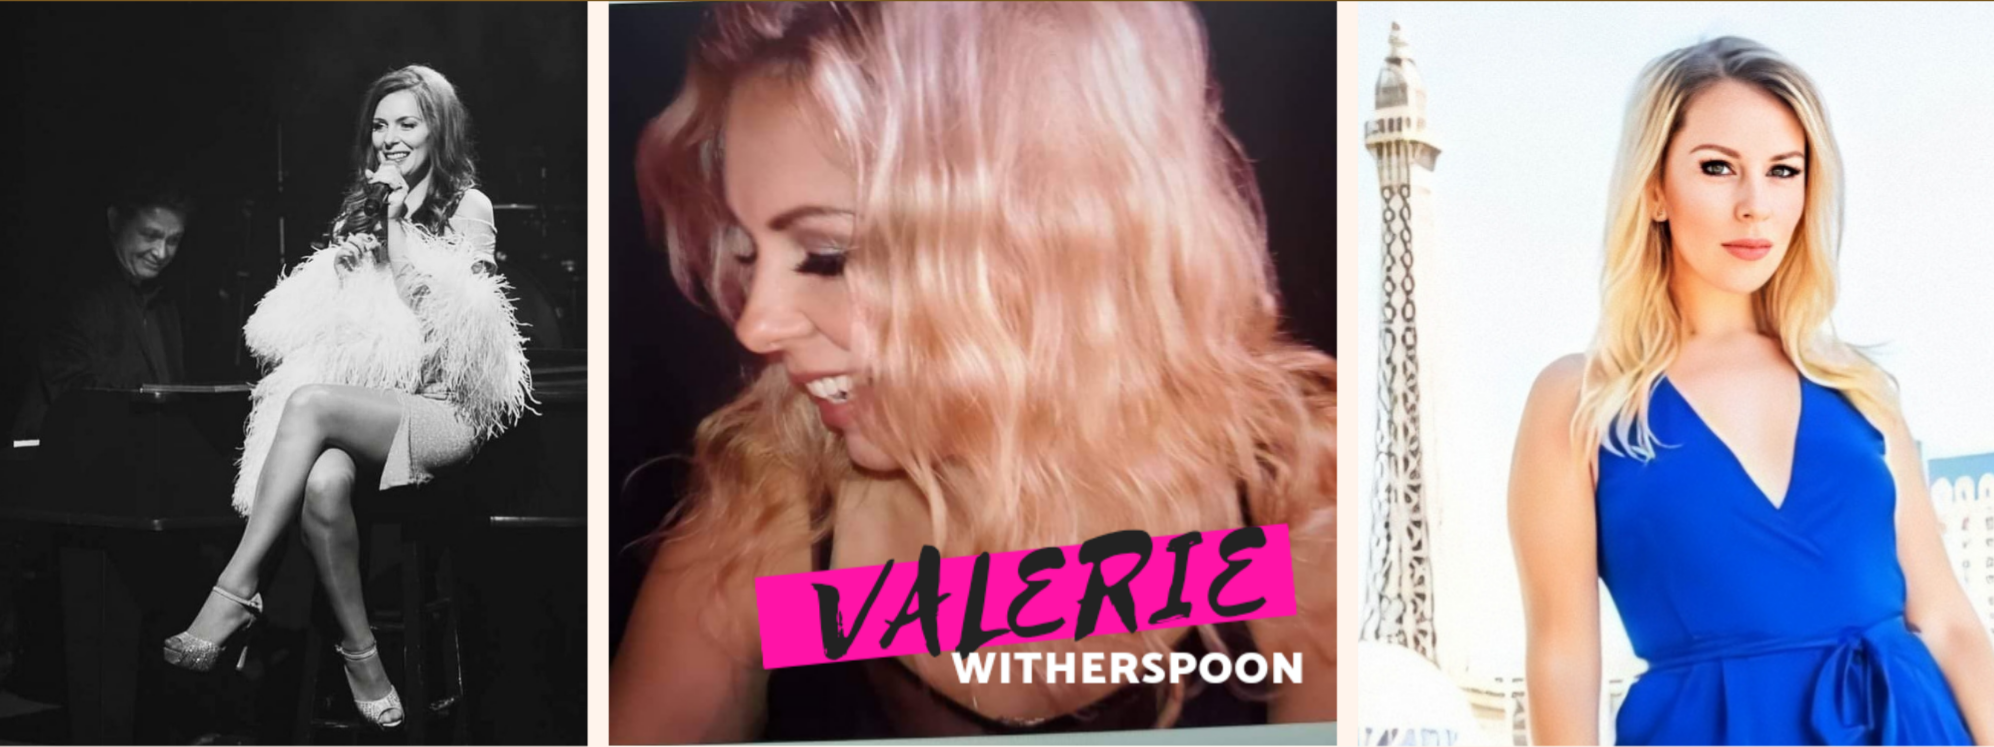 Valerie witherspoon, las vegas singer, theatre, resume, voice over